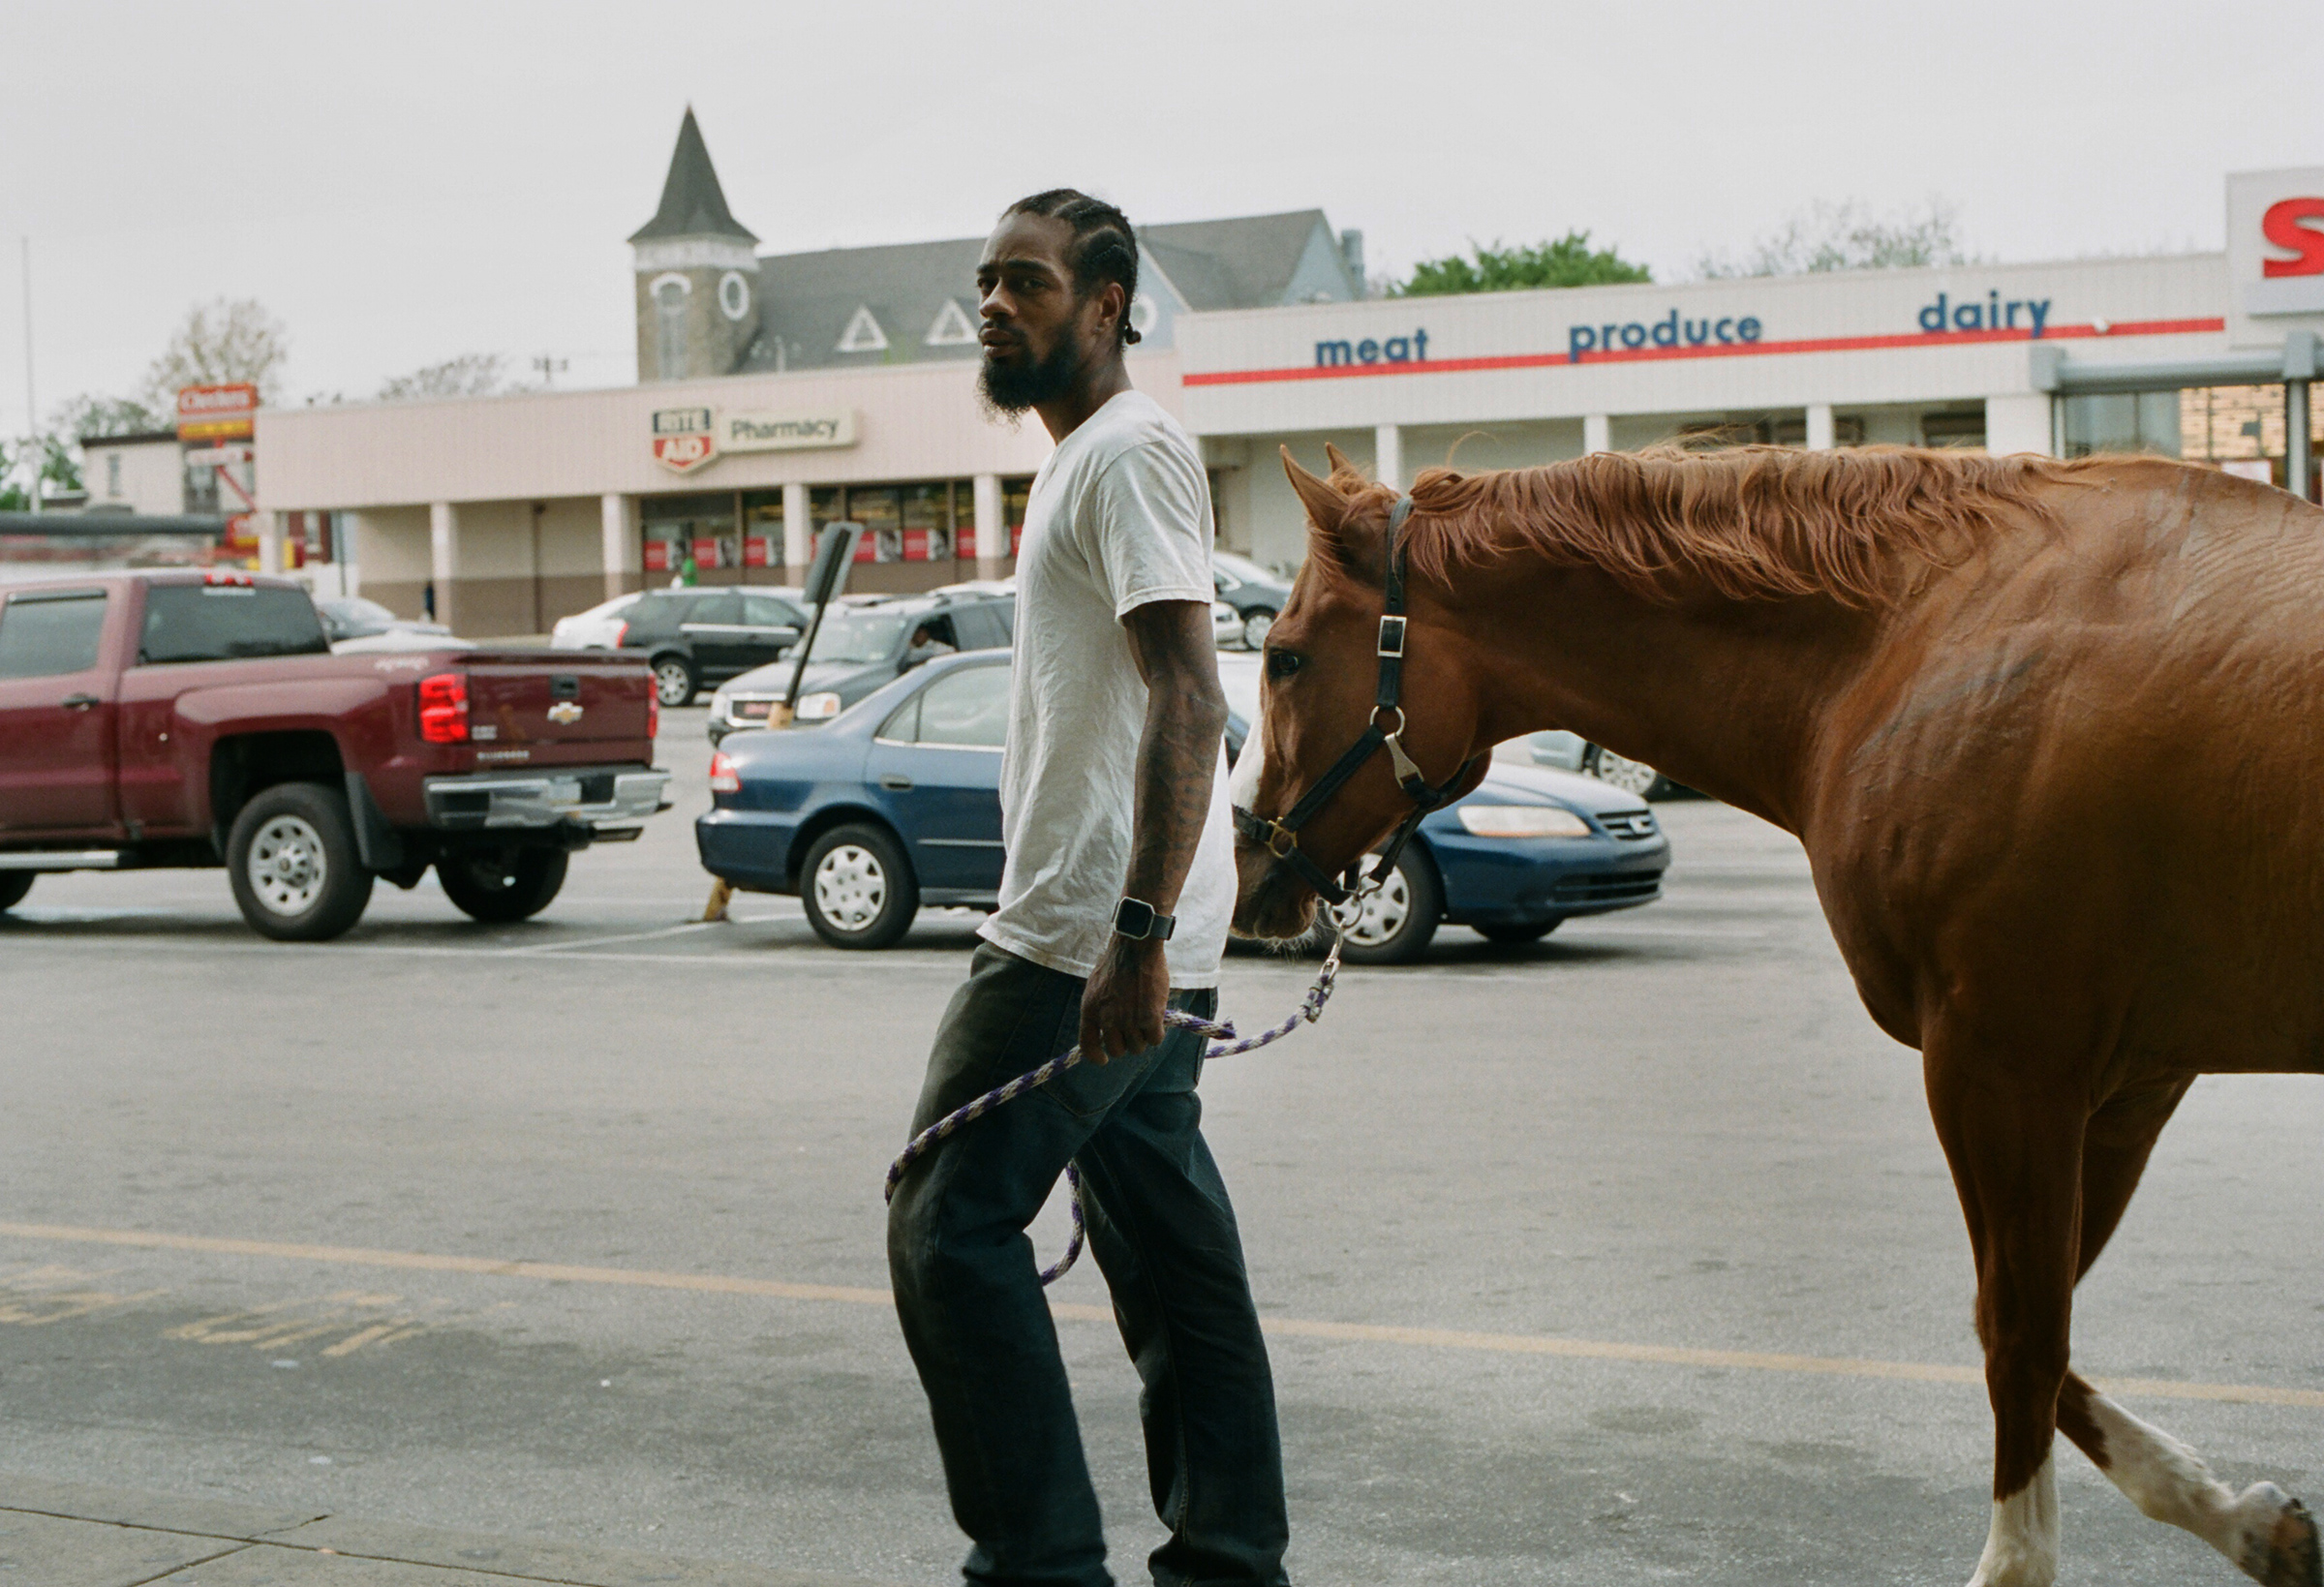 Jamil Prattis, who has maintained horses for 15 years, on Fletcher Street in 2017. (Sam Nixon)